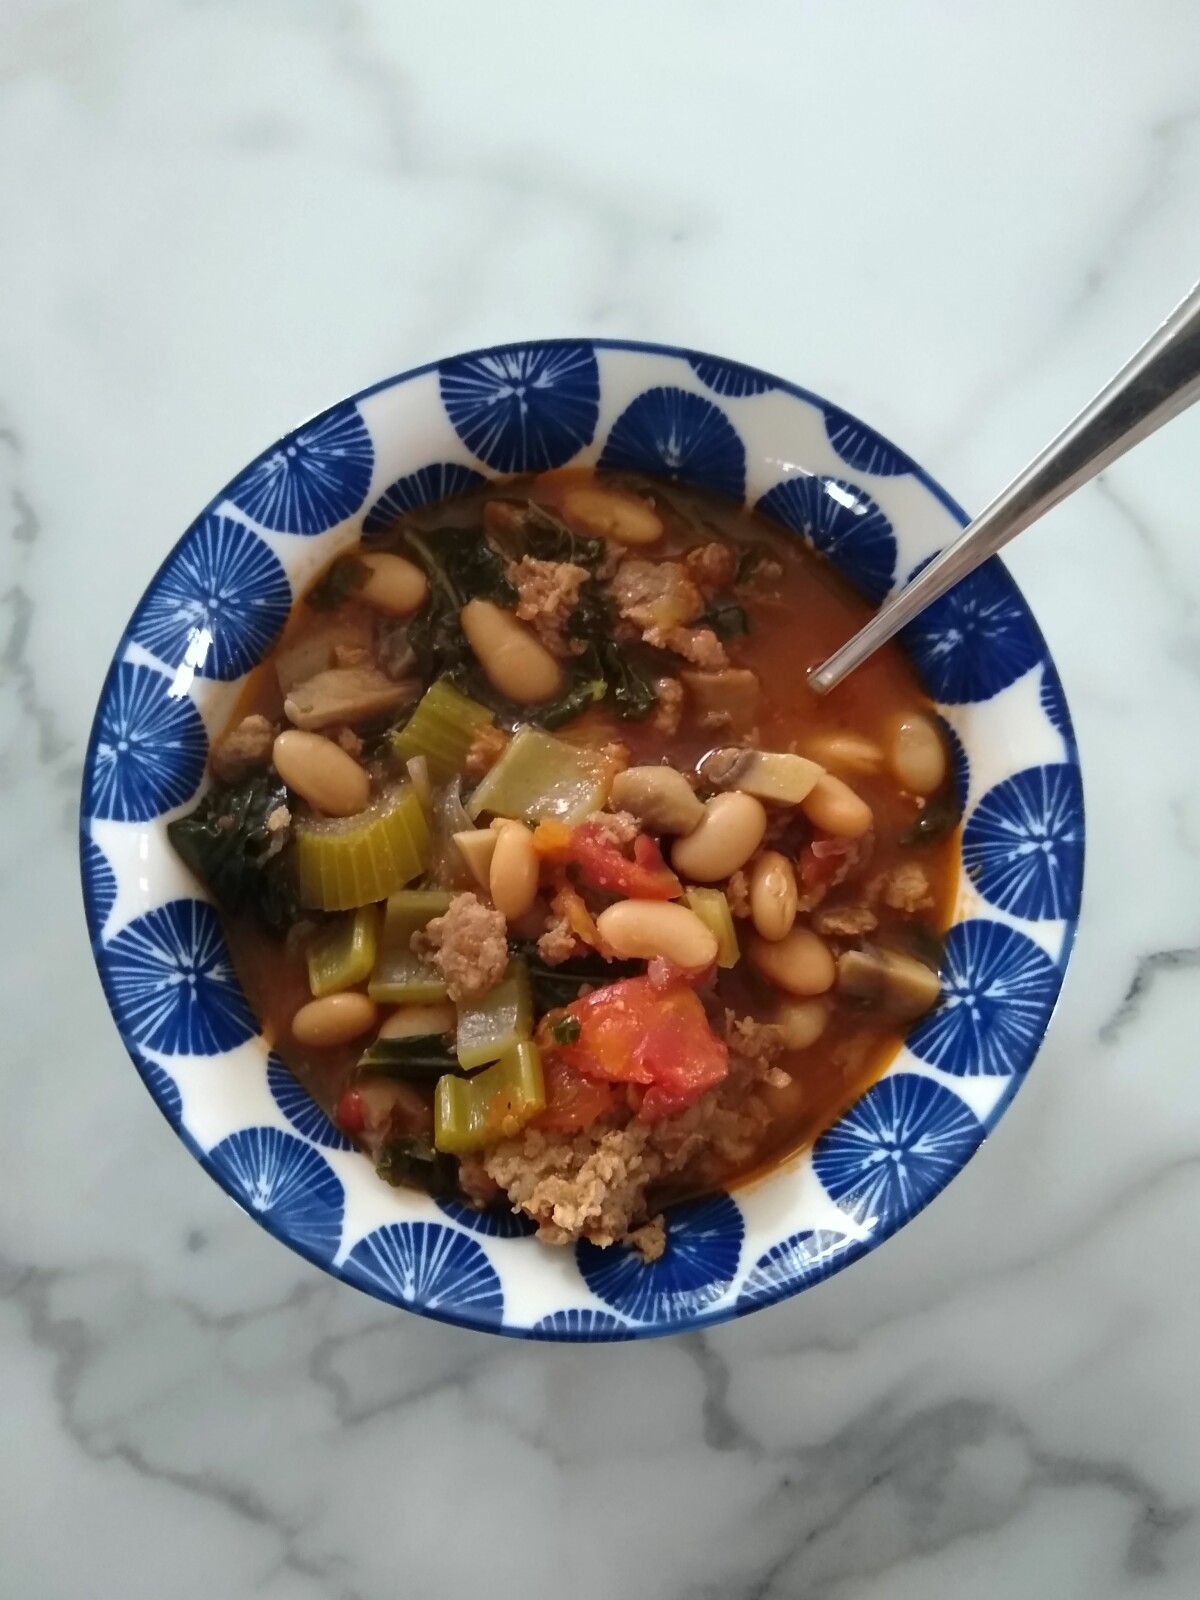 Italian Sausage and White Bean Soup